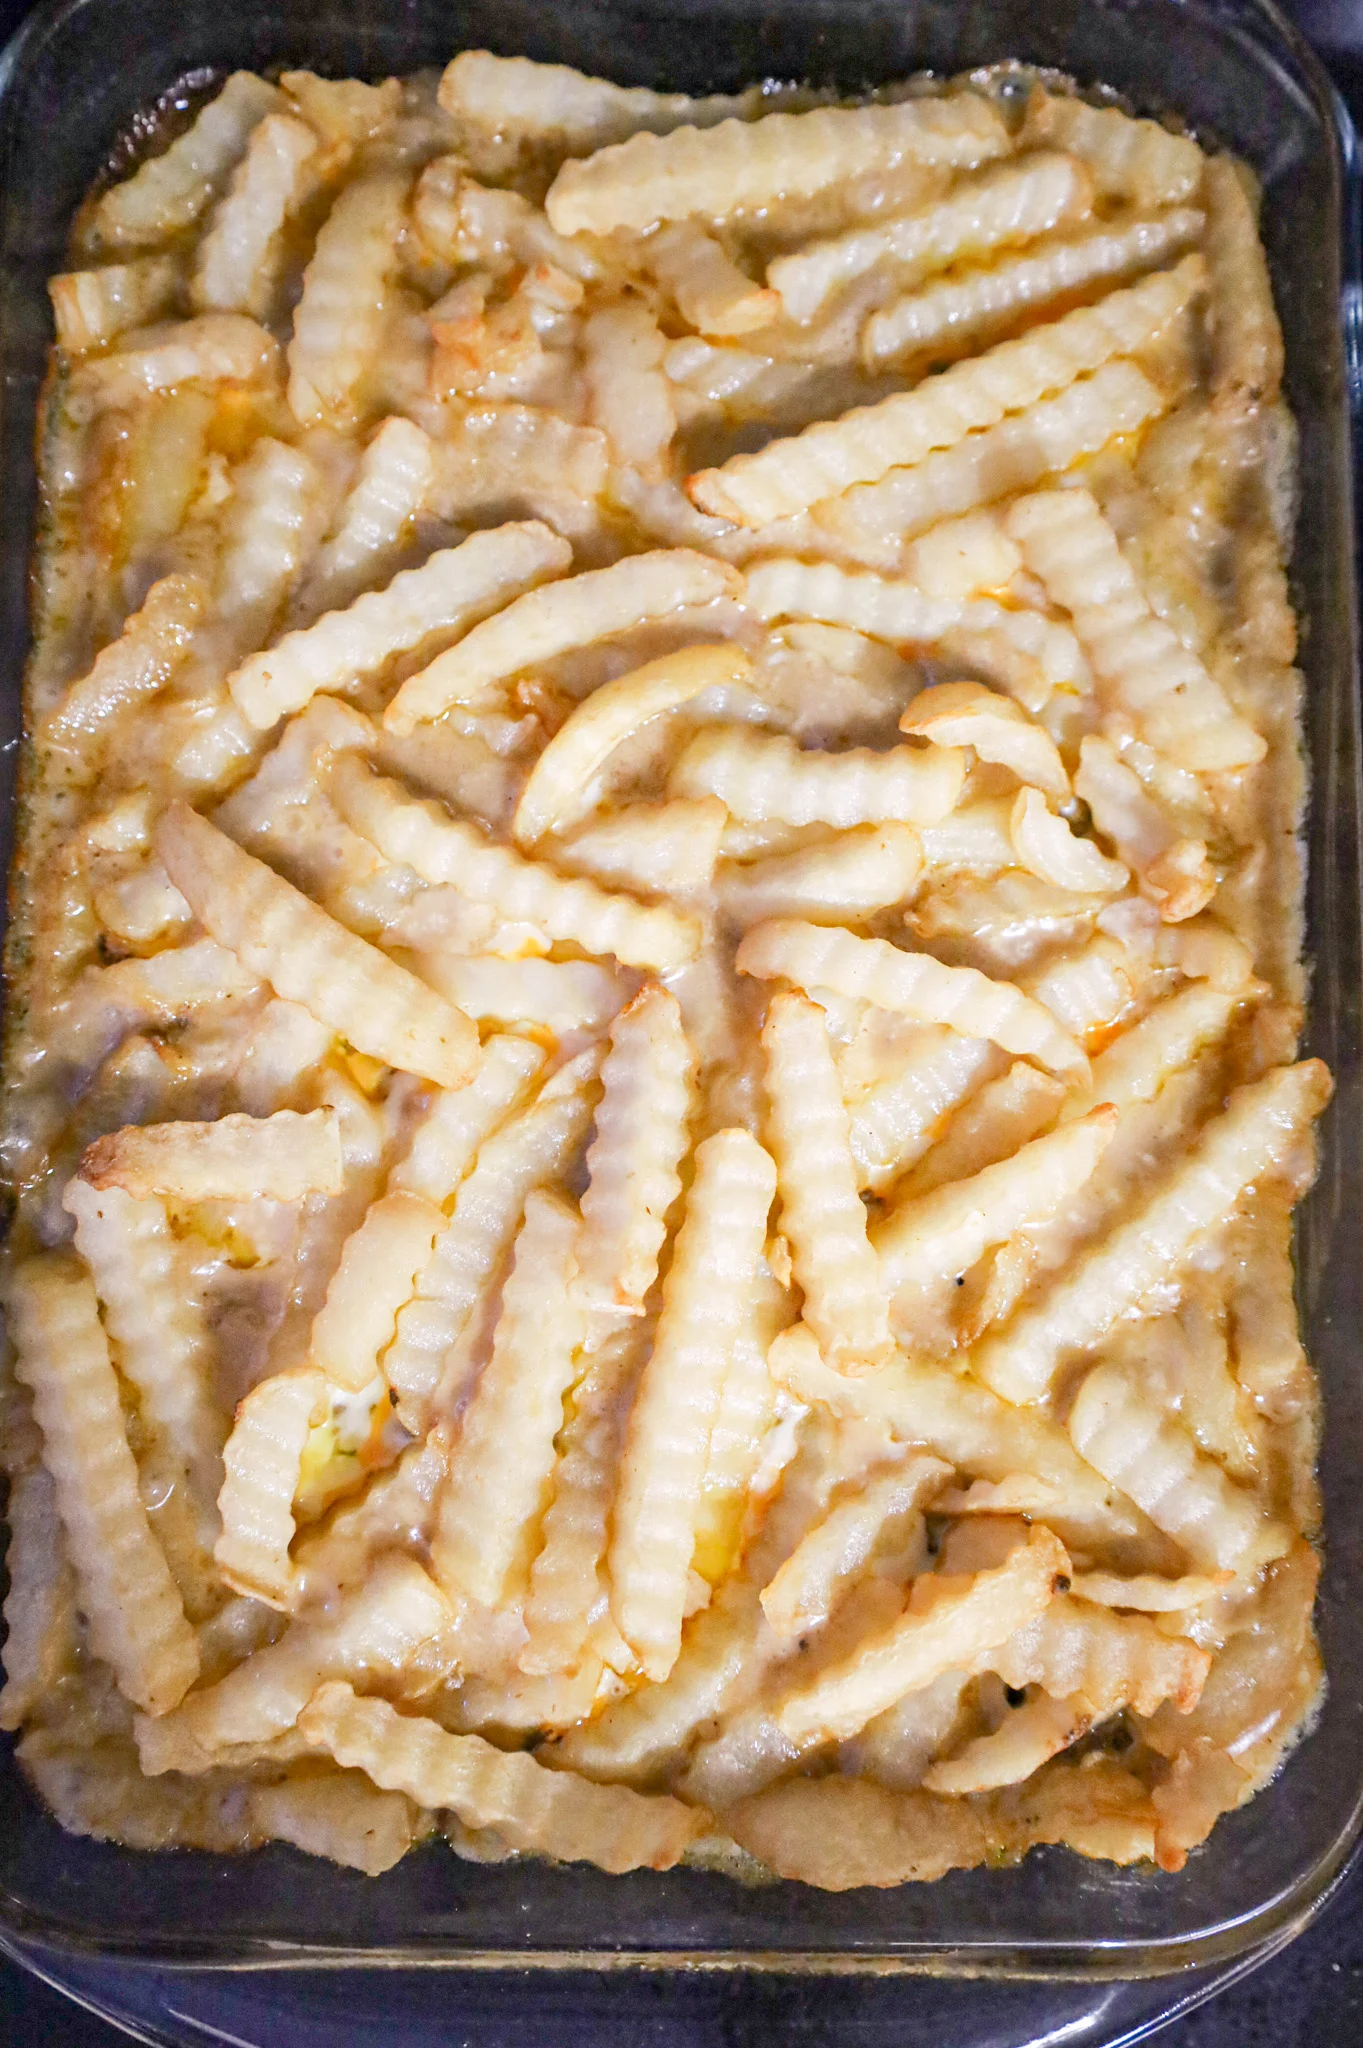 French fry casserole after baking